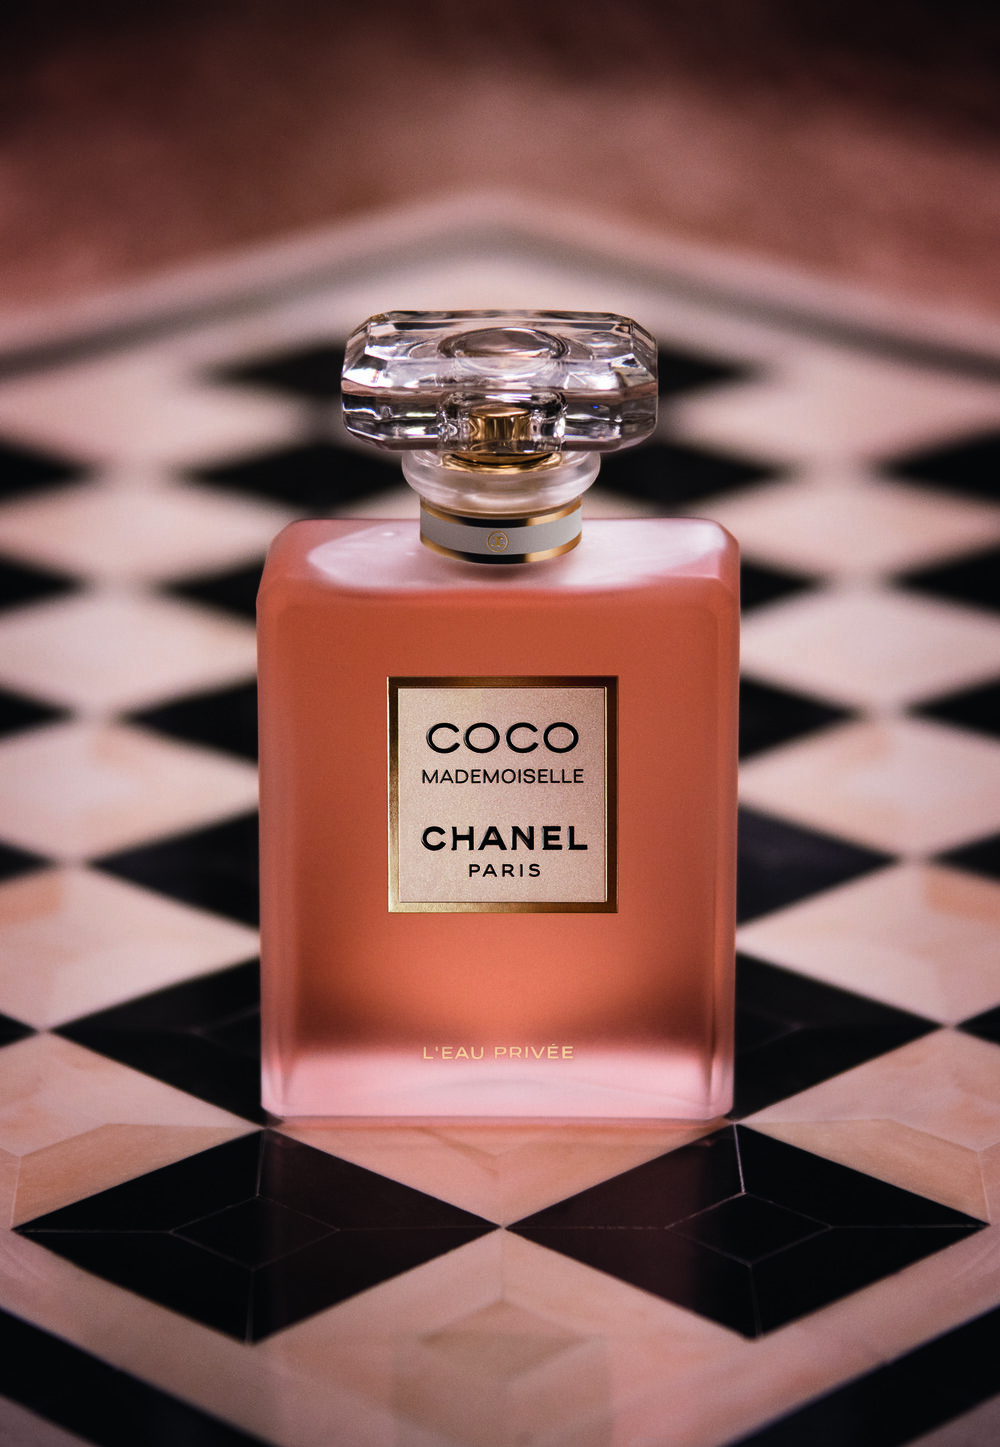 NOWY ZAPACH* - Chanel, Coco Mademoiselle L'Eau Privée. — CharlieNose